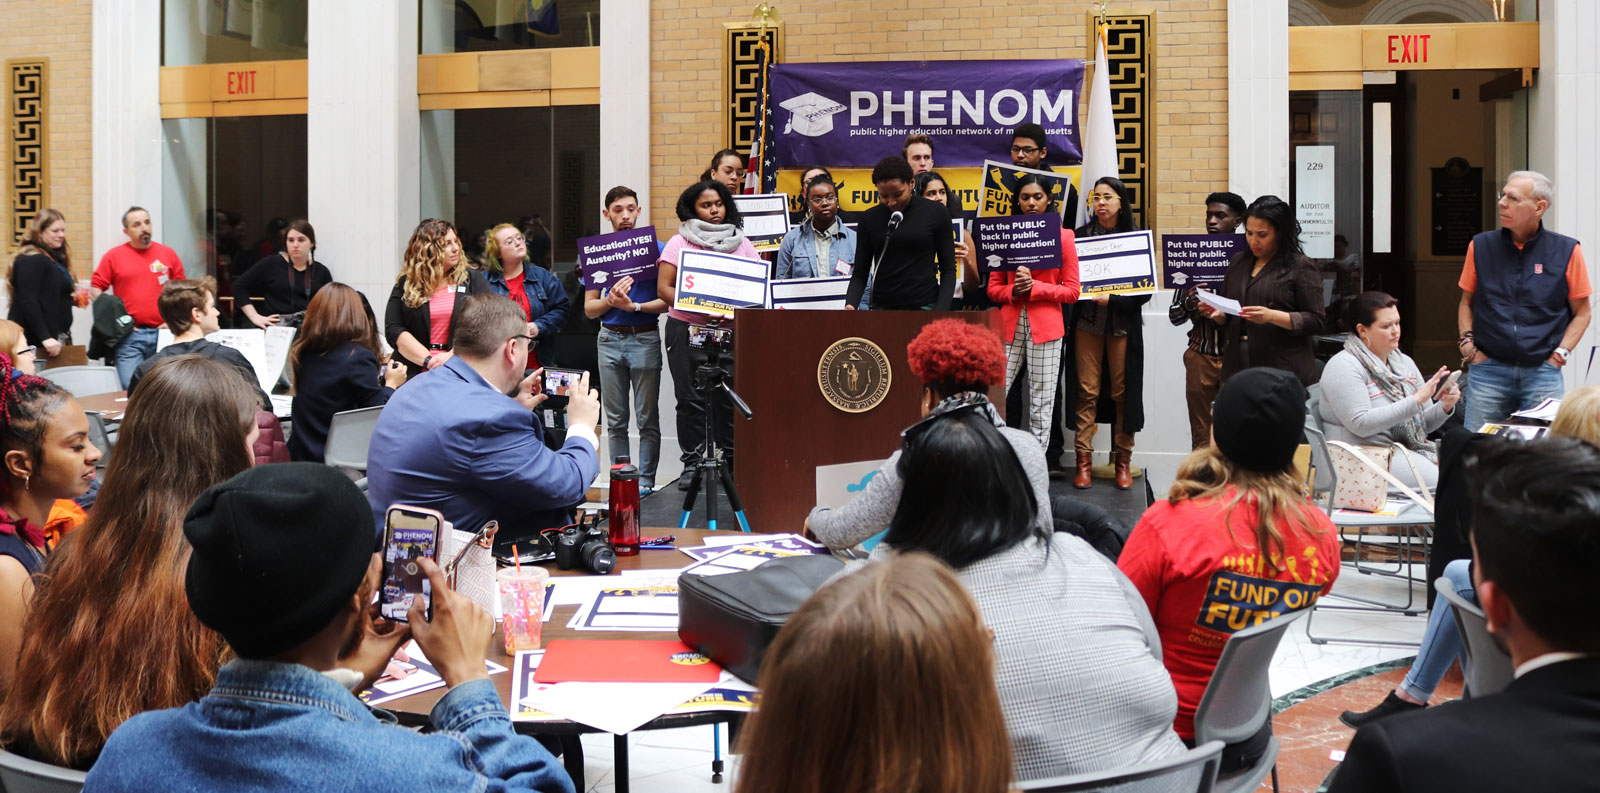 Update: PHENOM is hiring a new Executive Director and Organizing Director!